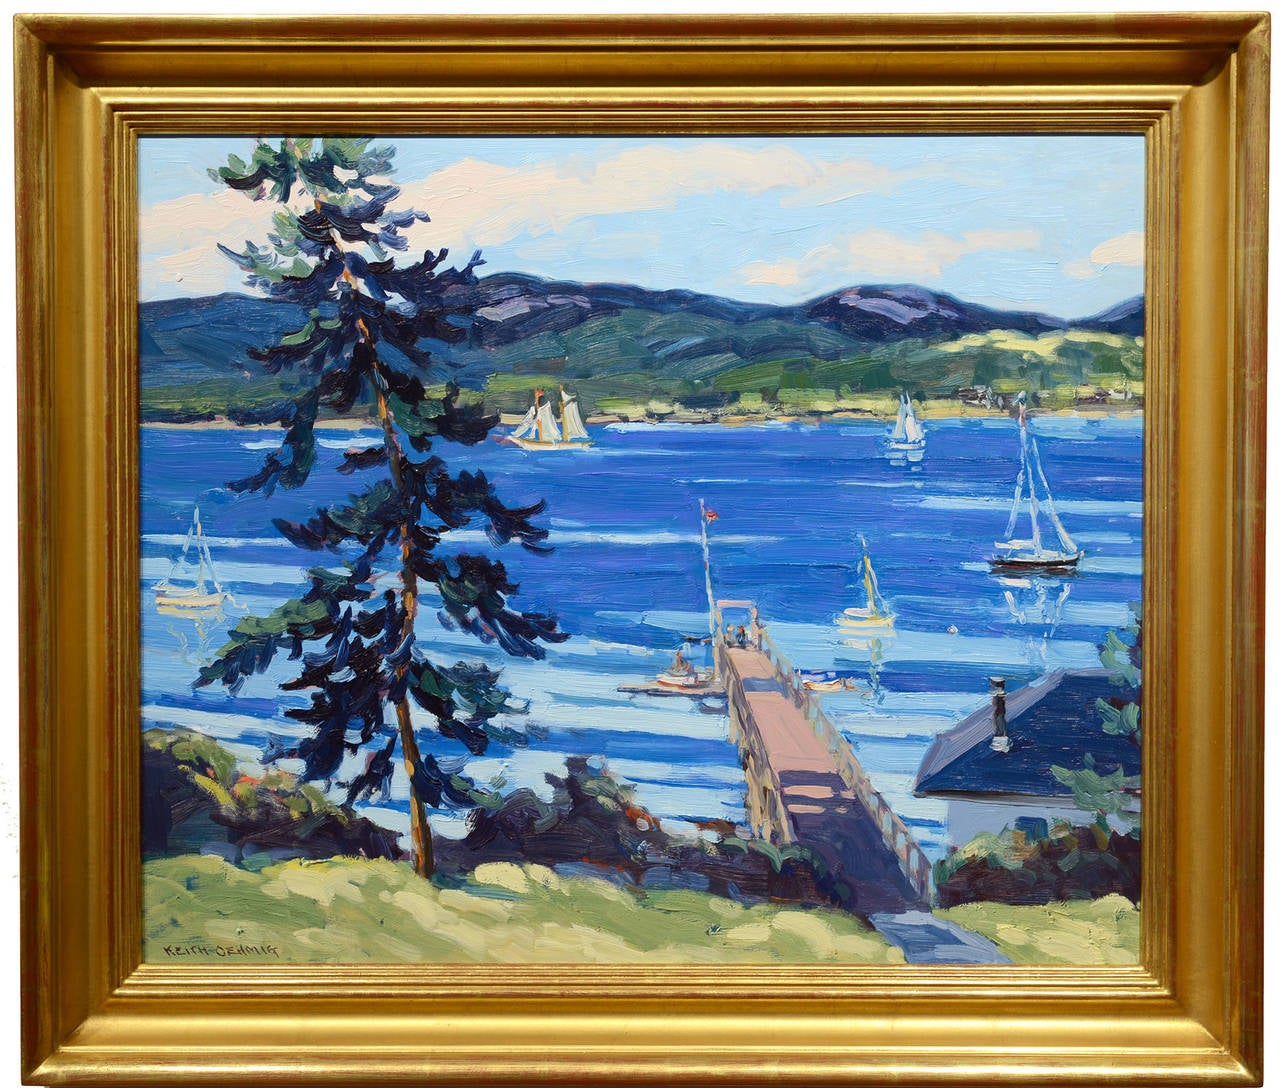 Sailing off Northeast Harbor - Painting by Keith Oehmig